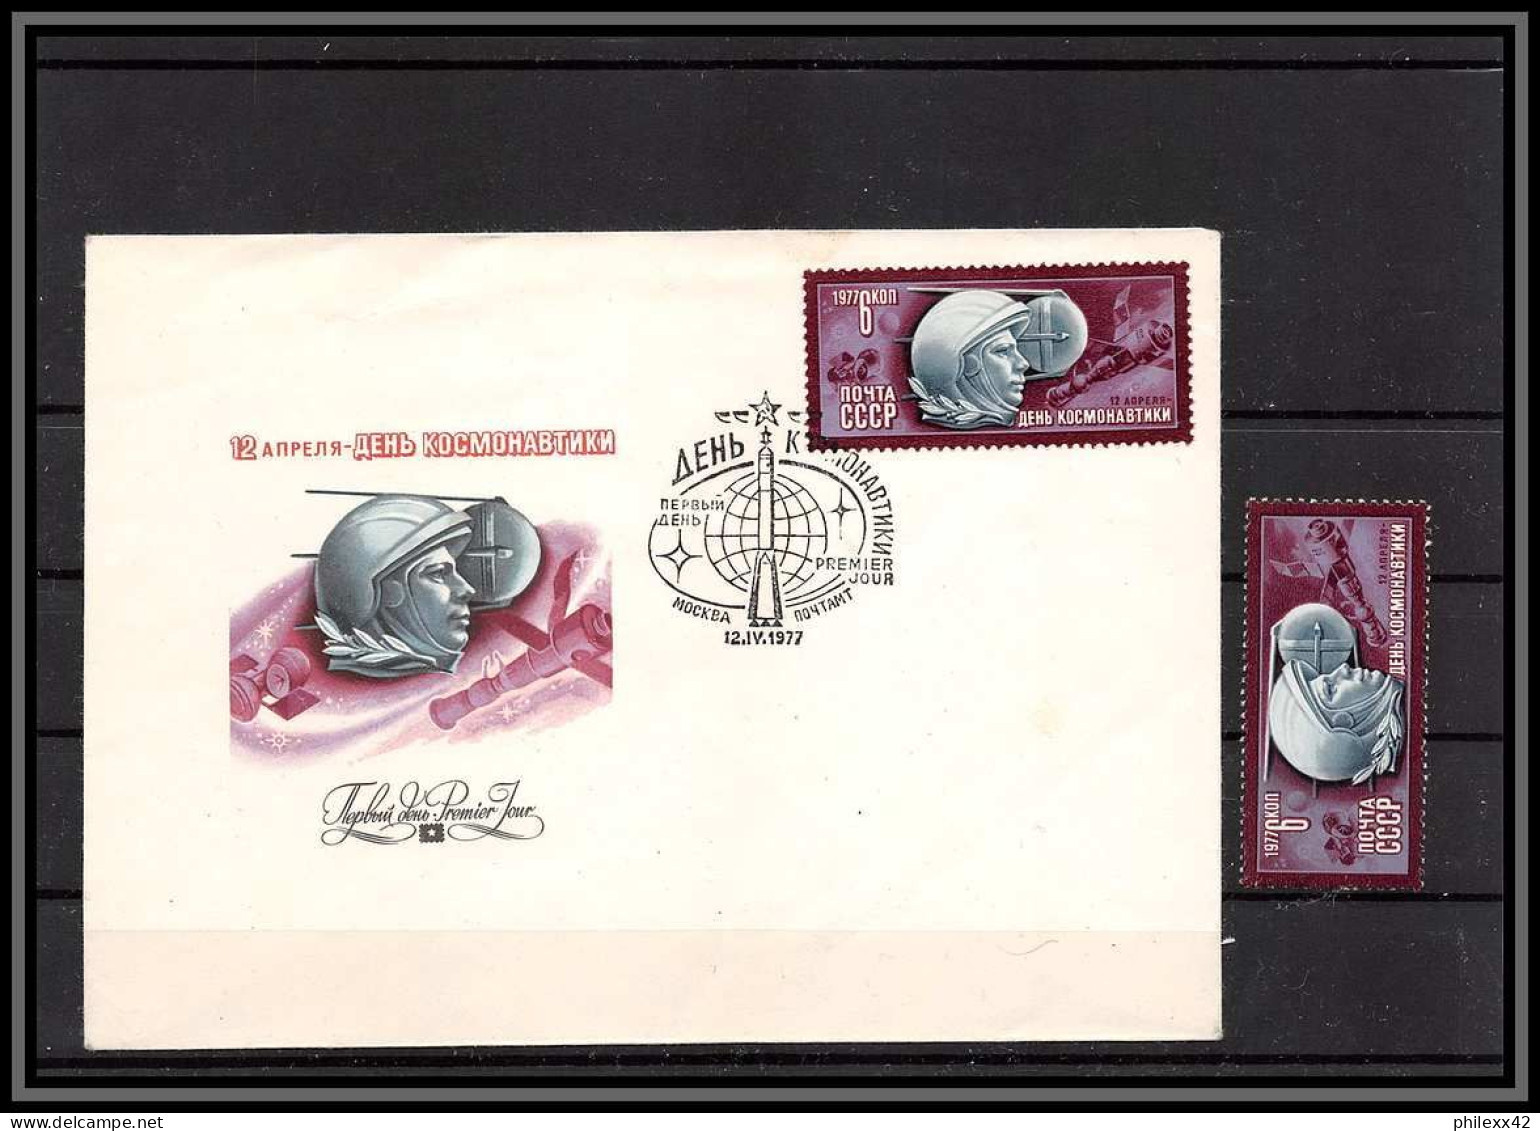 3391 Espace (space) Lettre (cover) Russie (Russia Urss USSR) 4363 Fdc + Mnh ** Cosmonauts Day Gagarine Gagarin 12/4/1977 - Russie & URSS